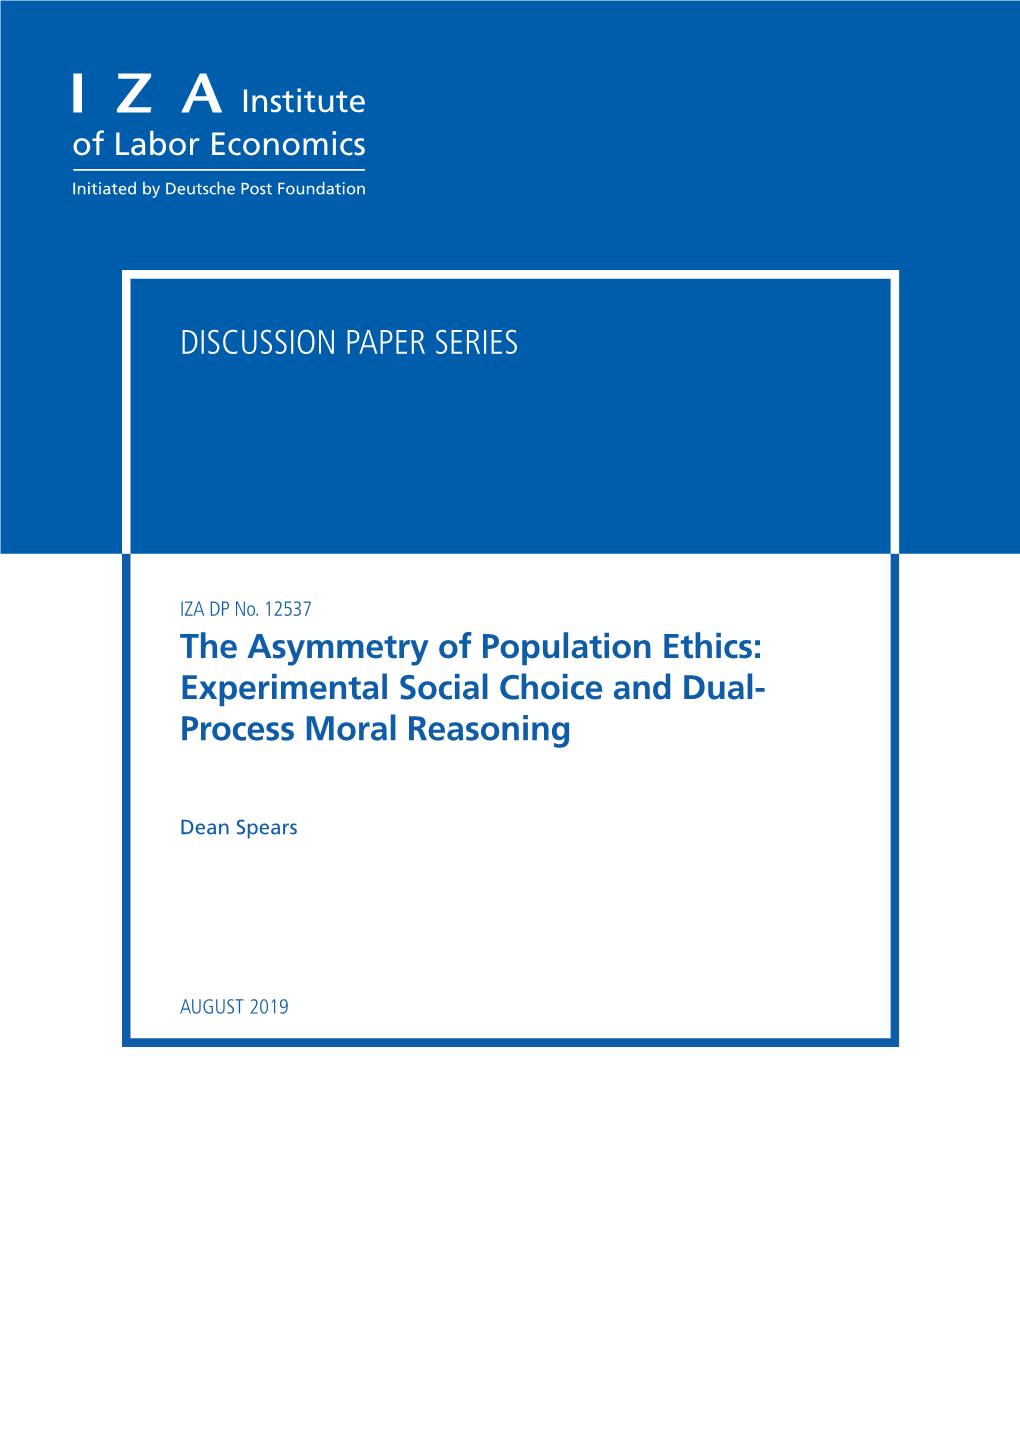 The Asymmetry of Population Ethics: Experimental Social Choice and Dual- Process Moral Reasoning